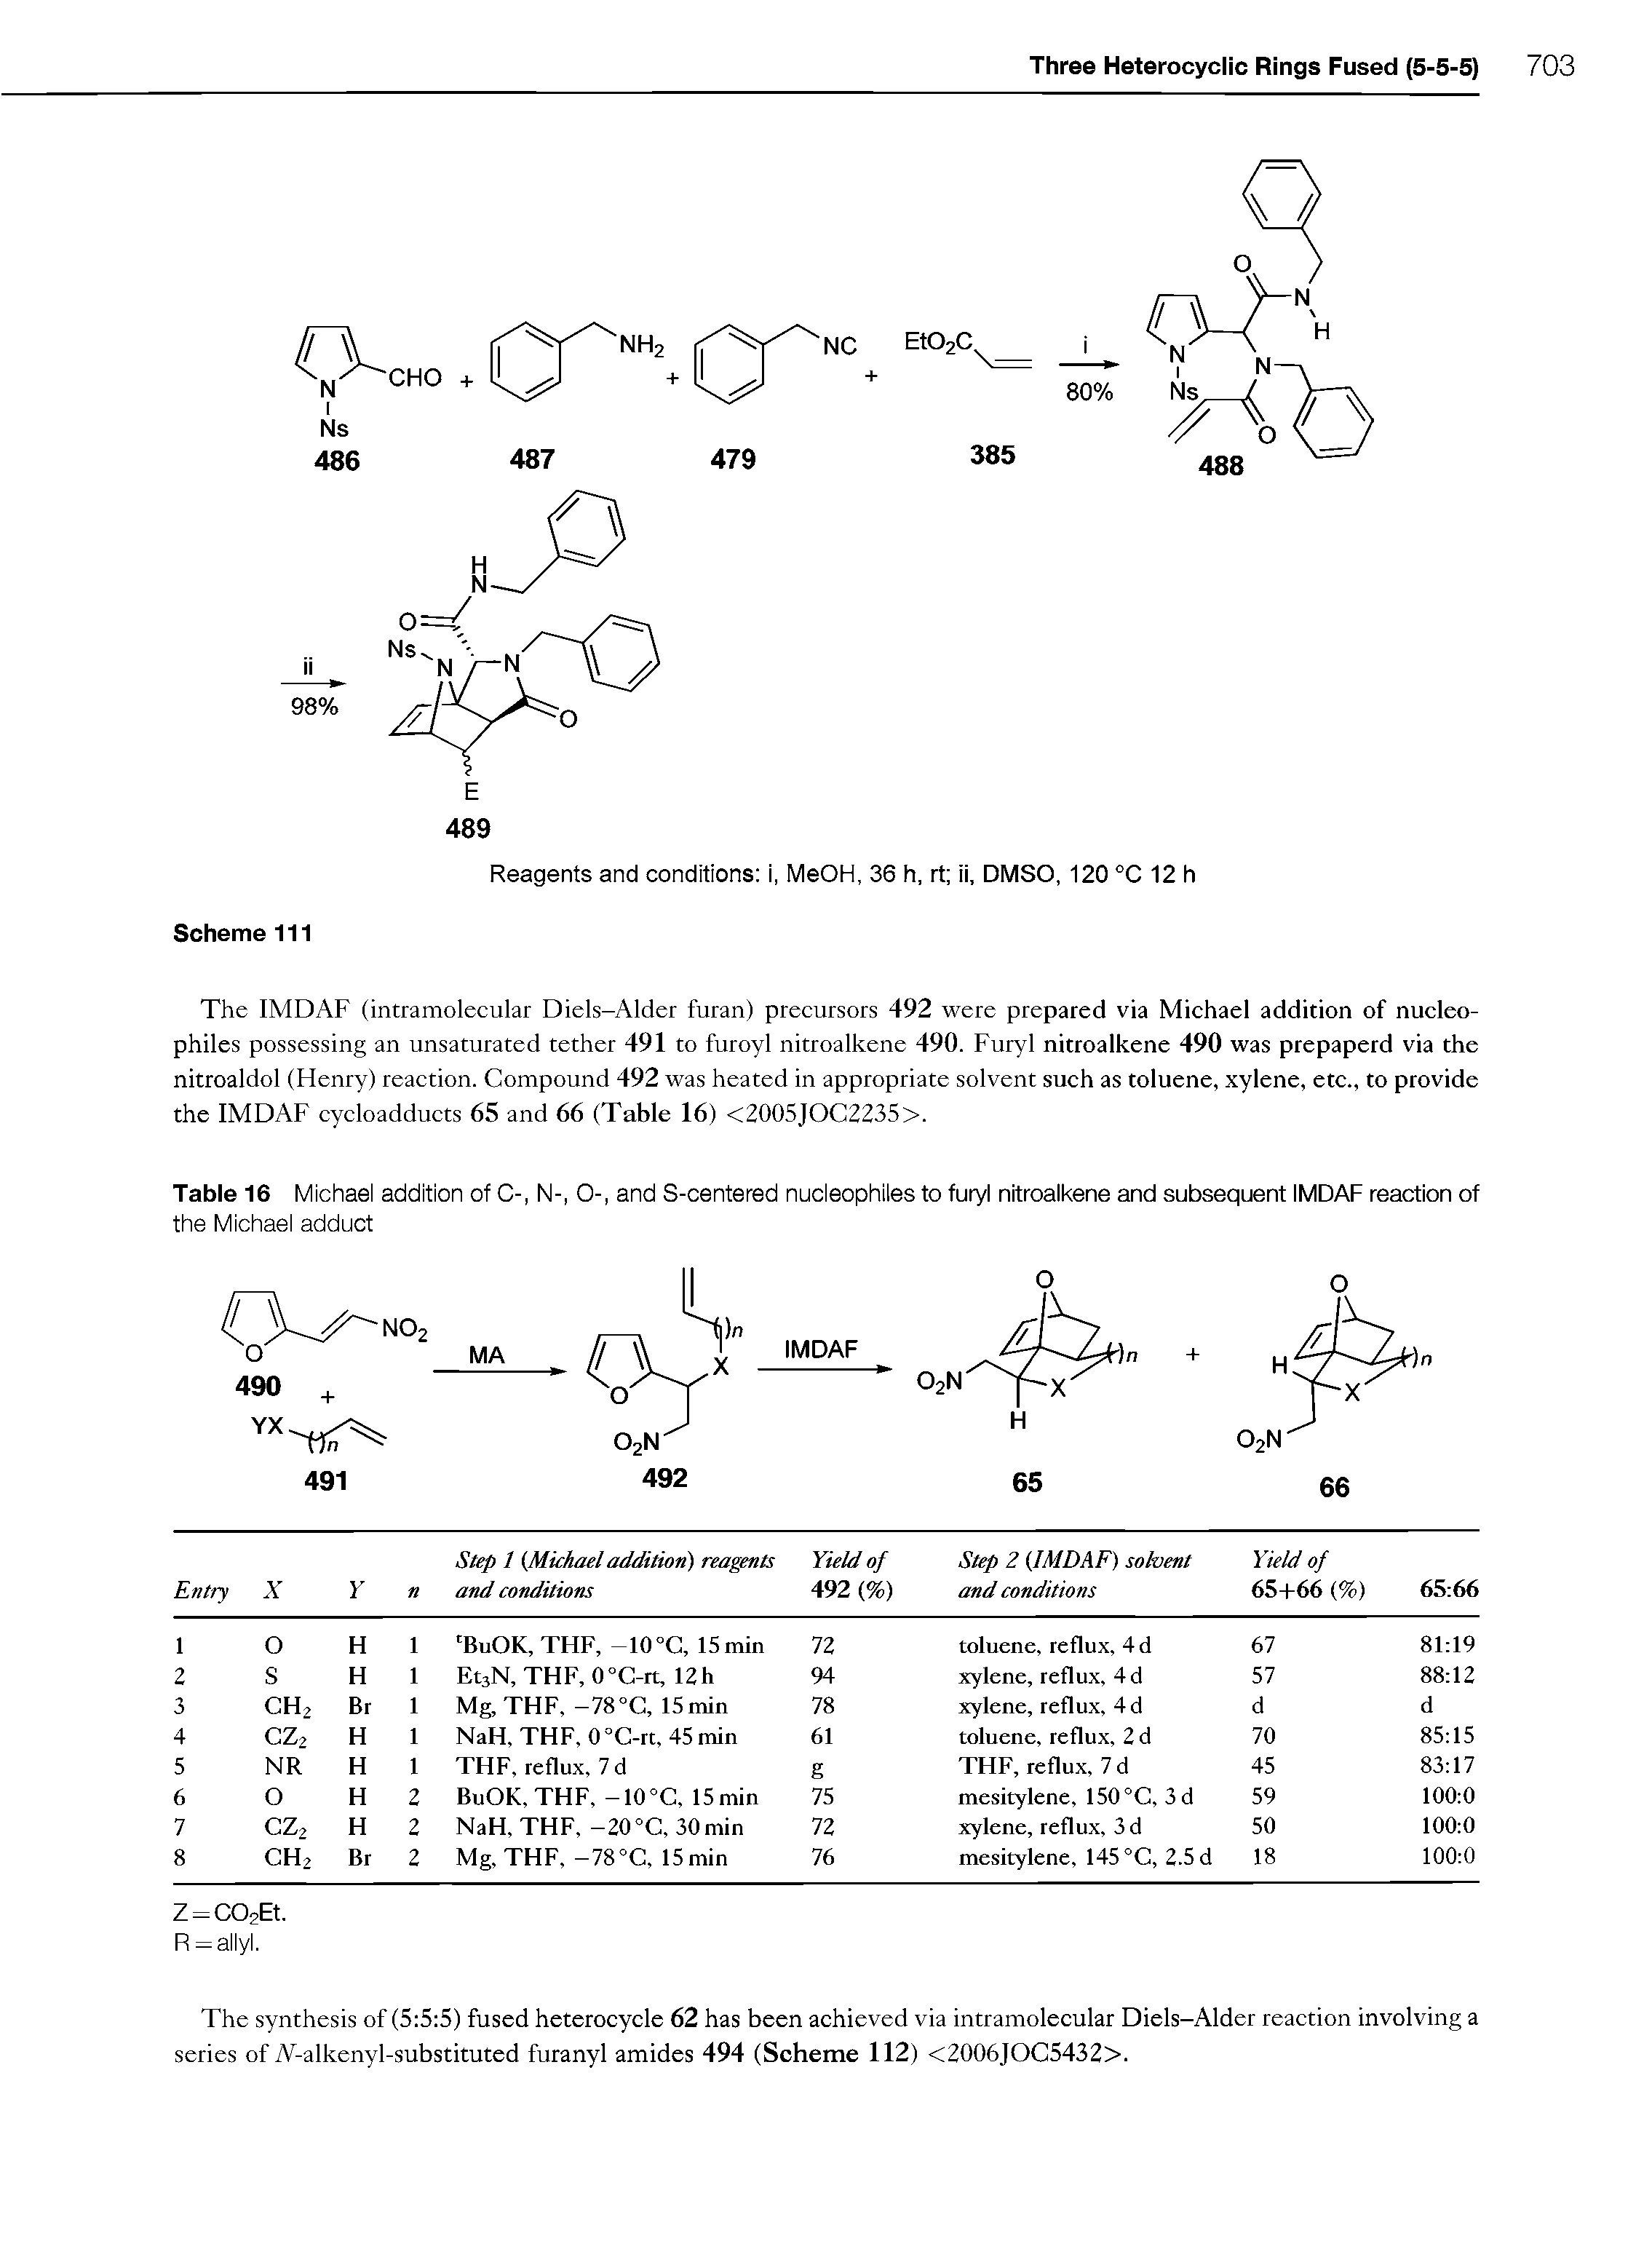 Table 16 Michael addition of C-, N-, 0-, and S-centered nucleophiles to furyl nitroalkene and subsequent IMDAF reaction of...